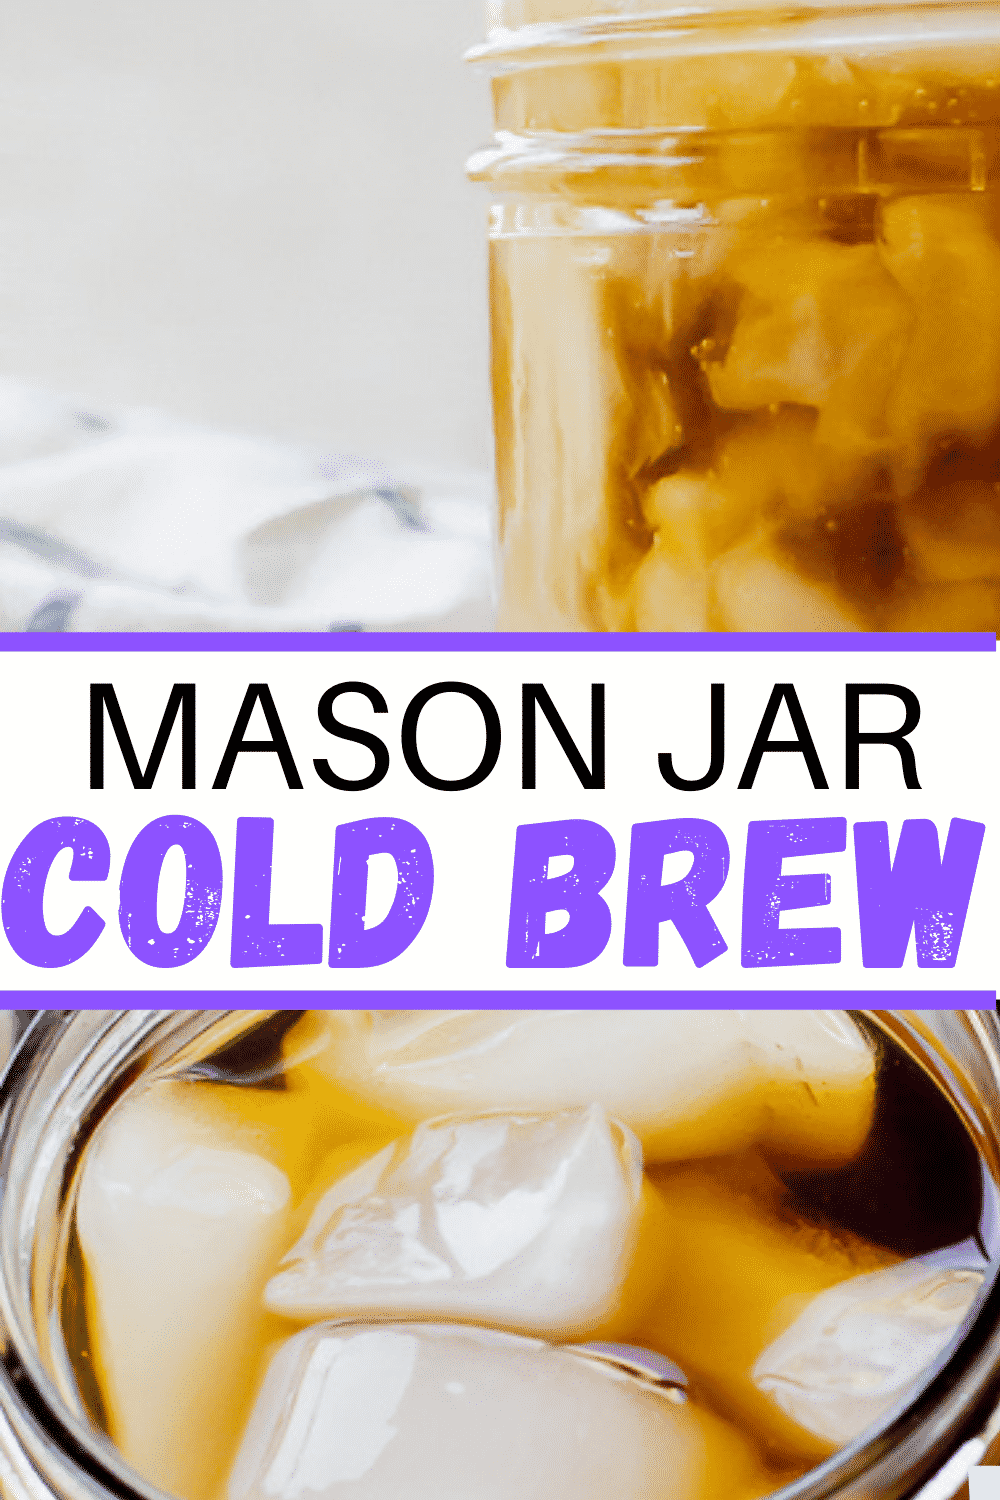 Mason Jar Cold Brew is a quick and easy way to make homemade Cold Brew Concentrate. No need to buy expensive cold brew, when you can make it at home. #masonjarboldbrew #masonjar #coldbrew